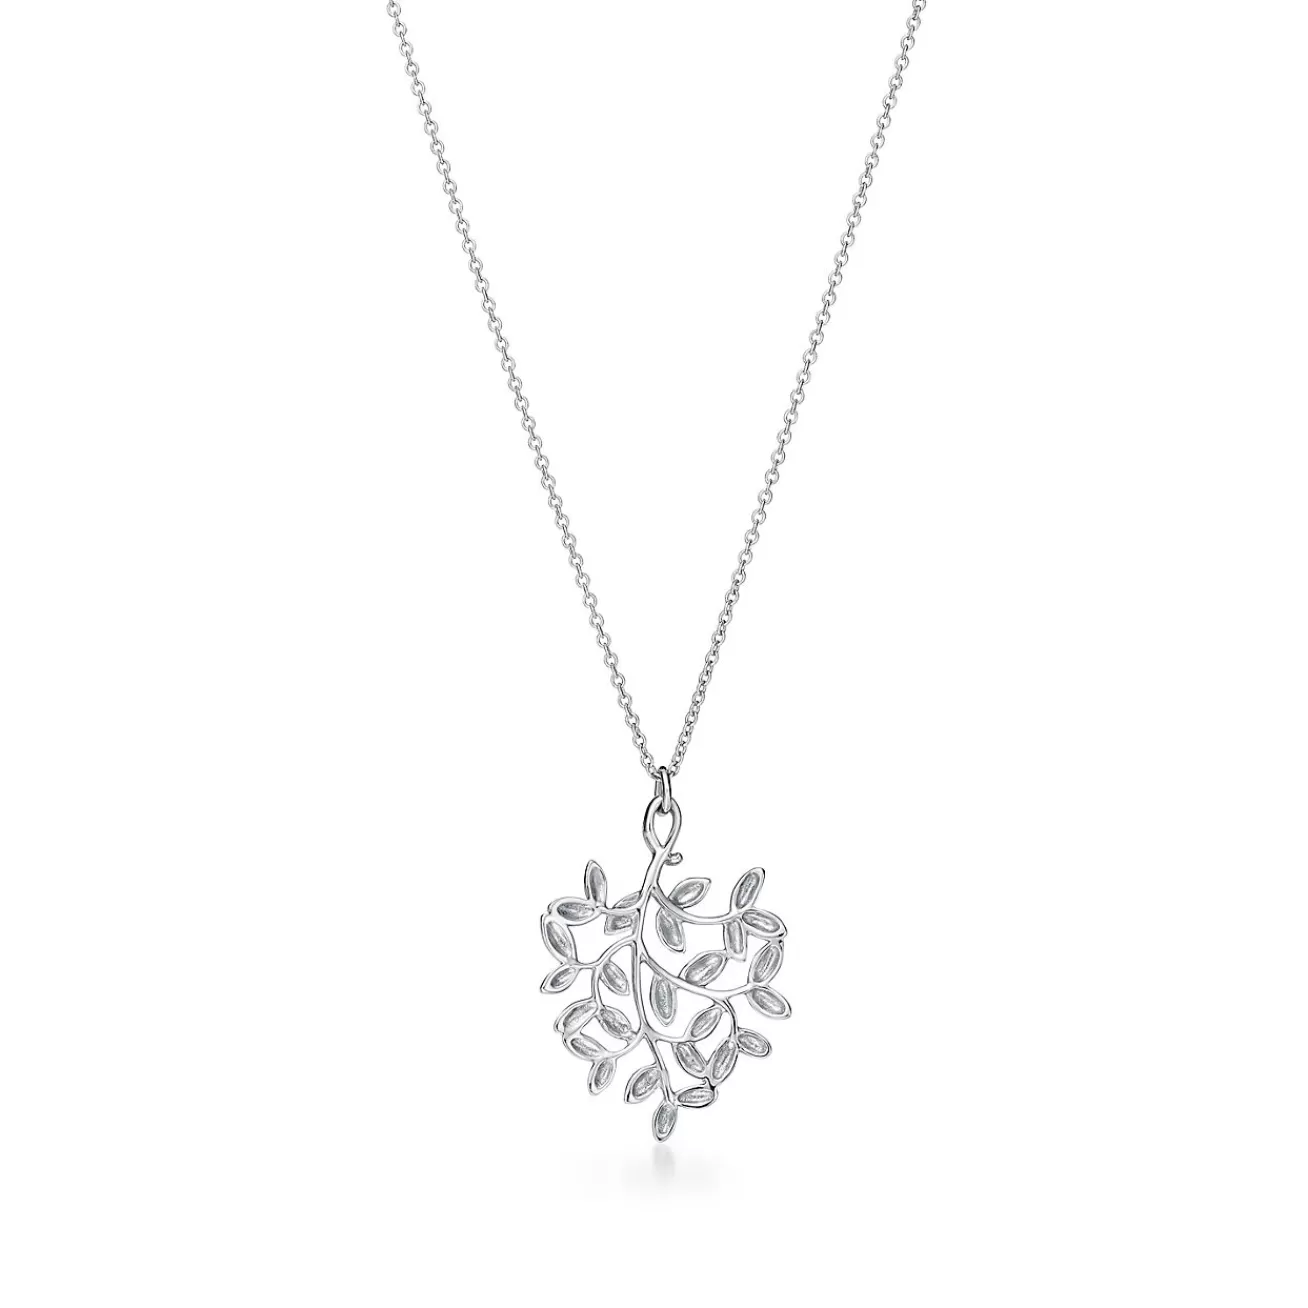 Tiffany & Co. Paloma Picasso® Olive Leaf pendant in sterling silver, small. | ^ Necklaces & Pendants | Gifts for Her